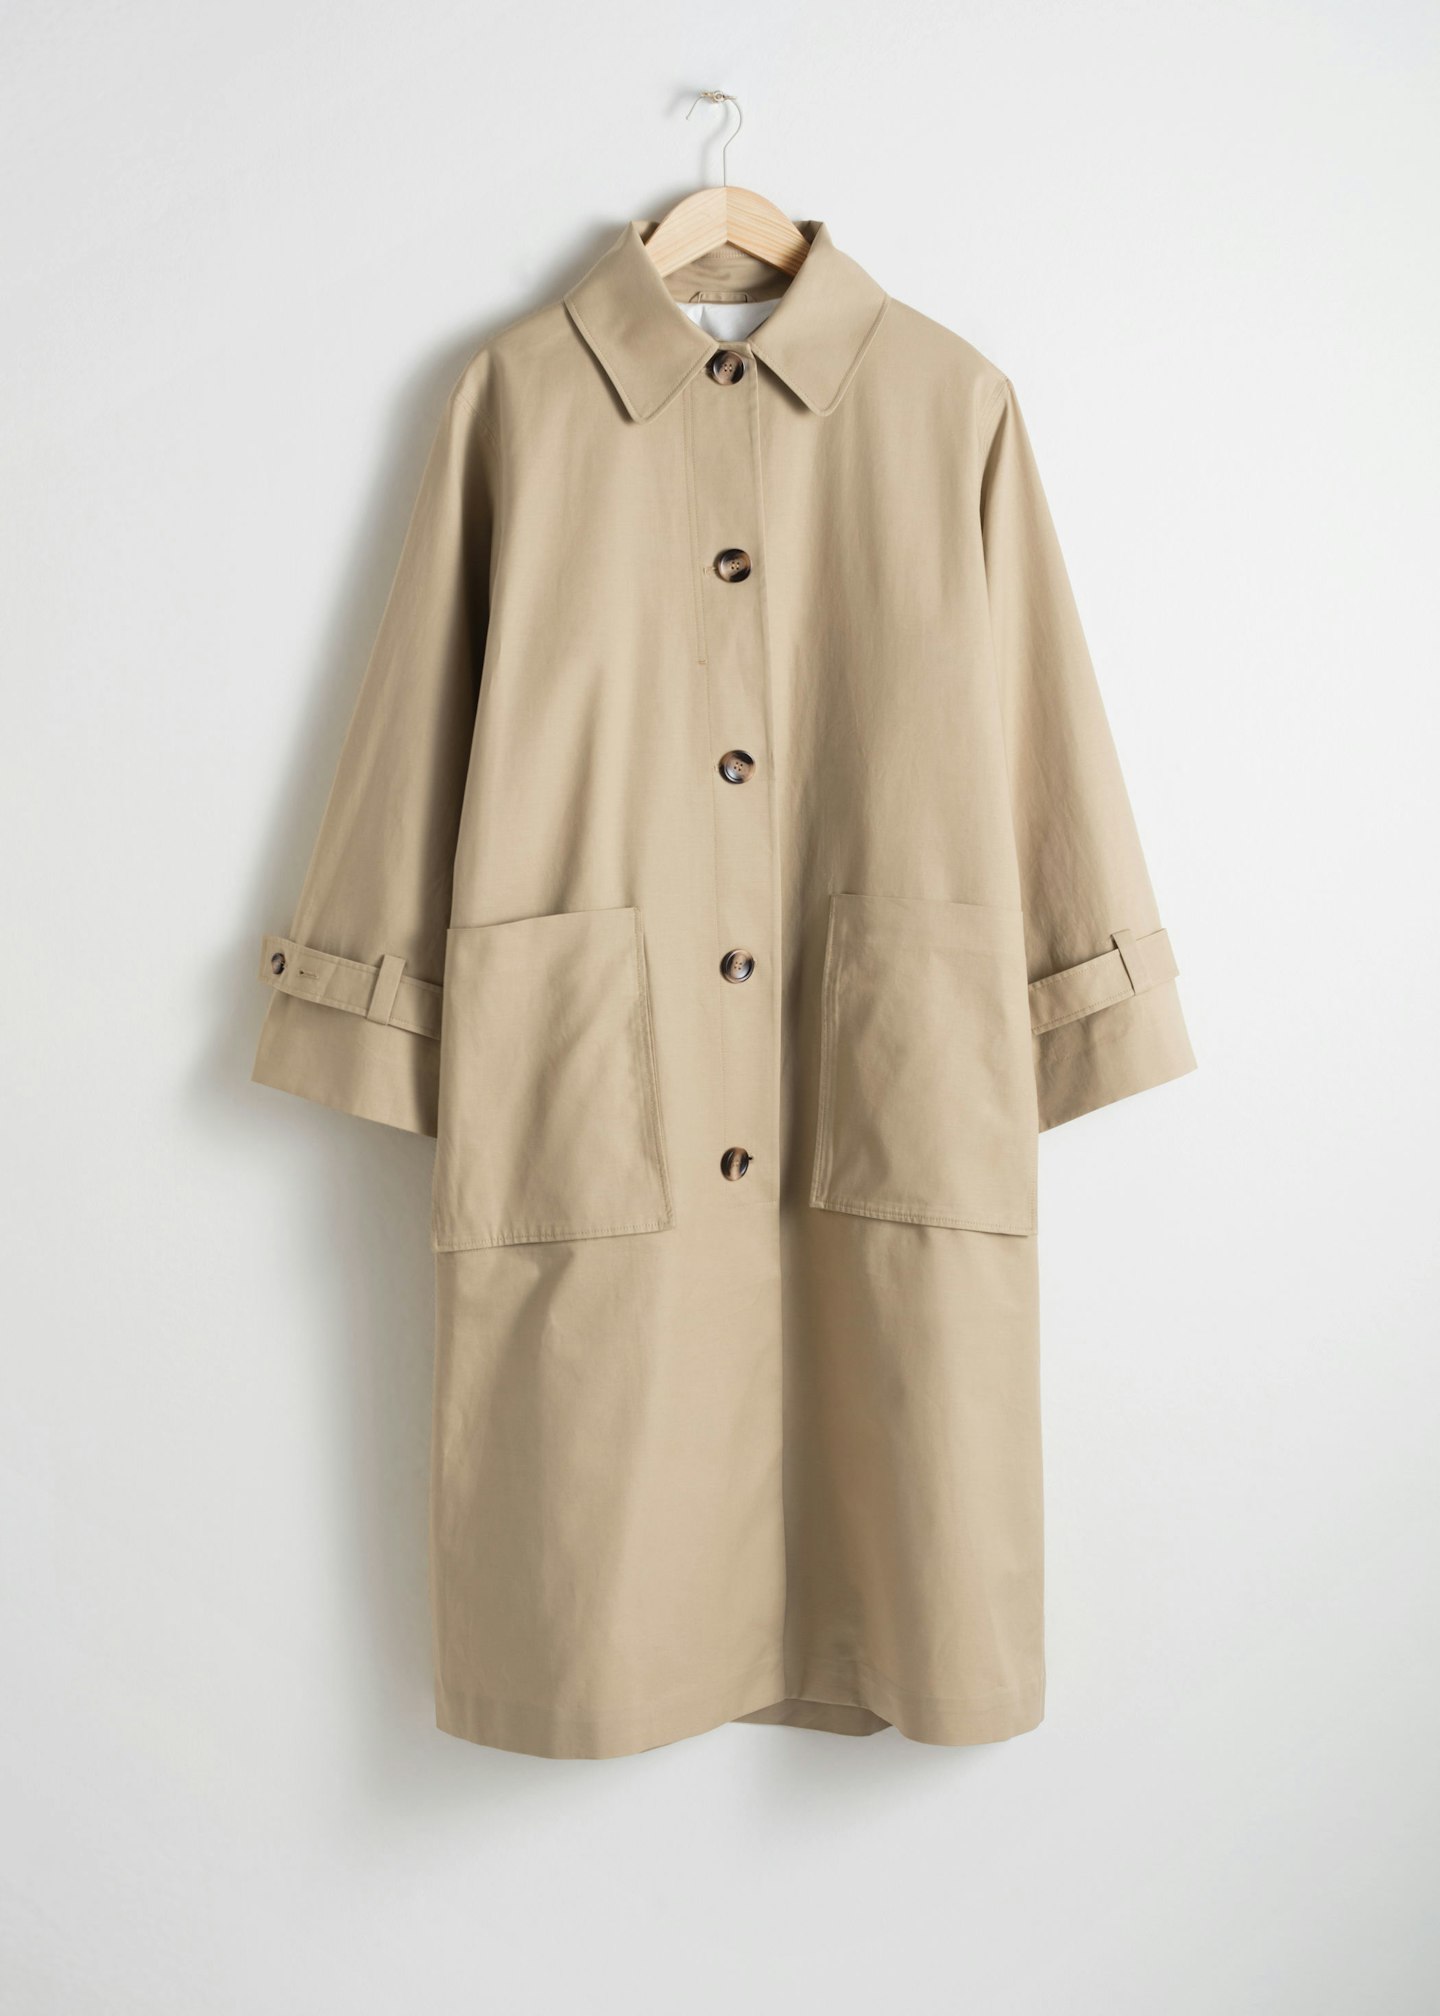 & Other Stories, Oversized Utilitarian Trench Coat, £129